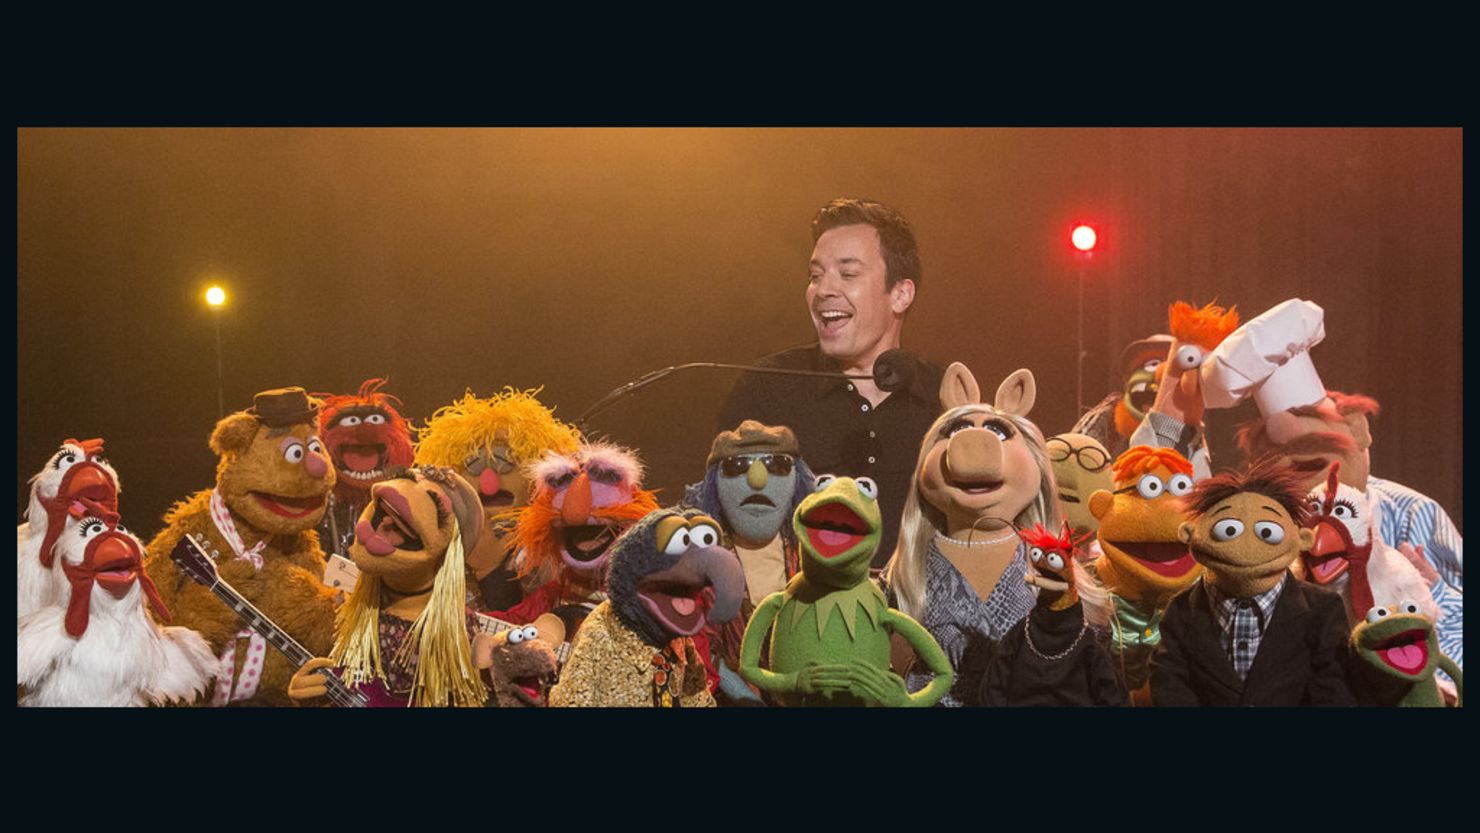 The Muppets band joined Jimmy Fallon as he hosted his last episode of "Late Night."